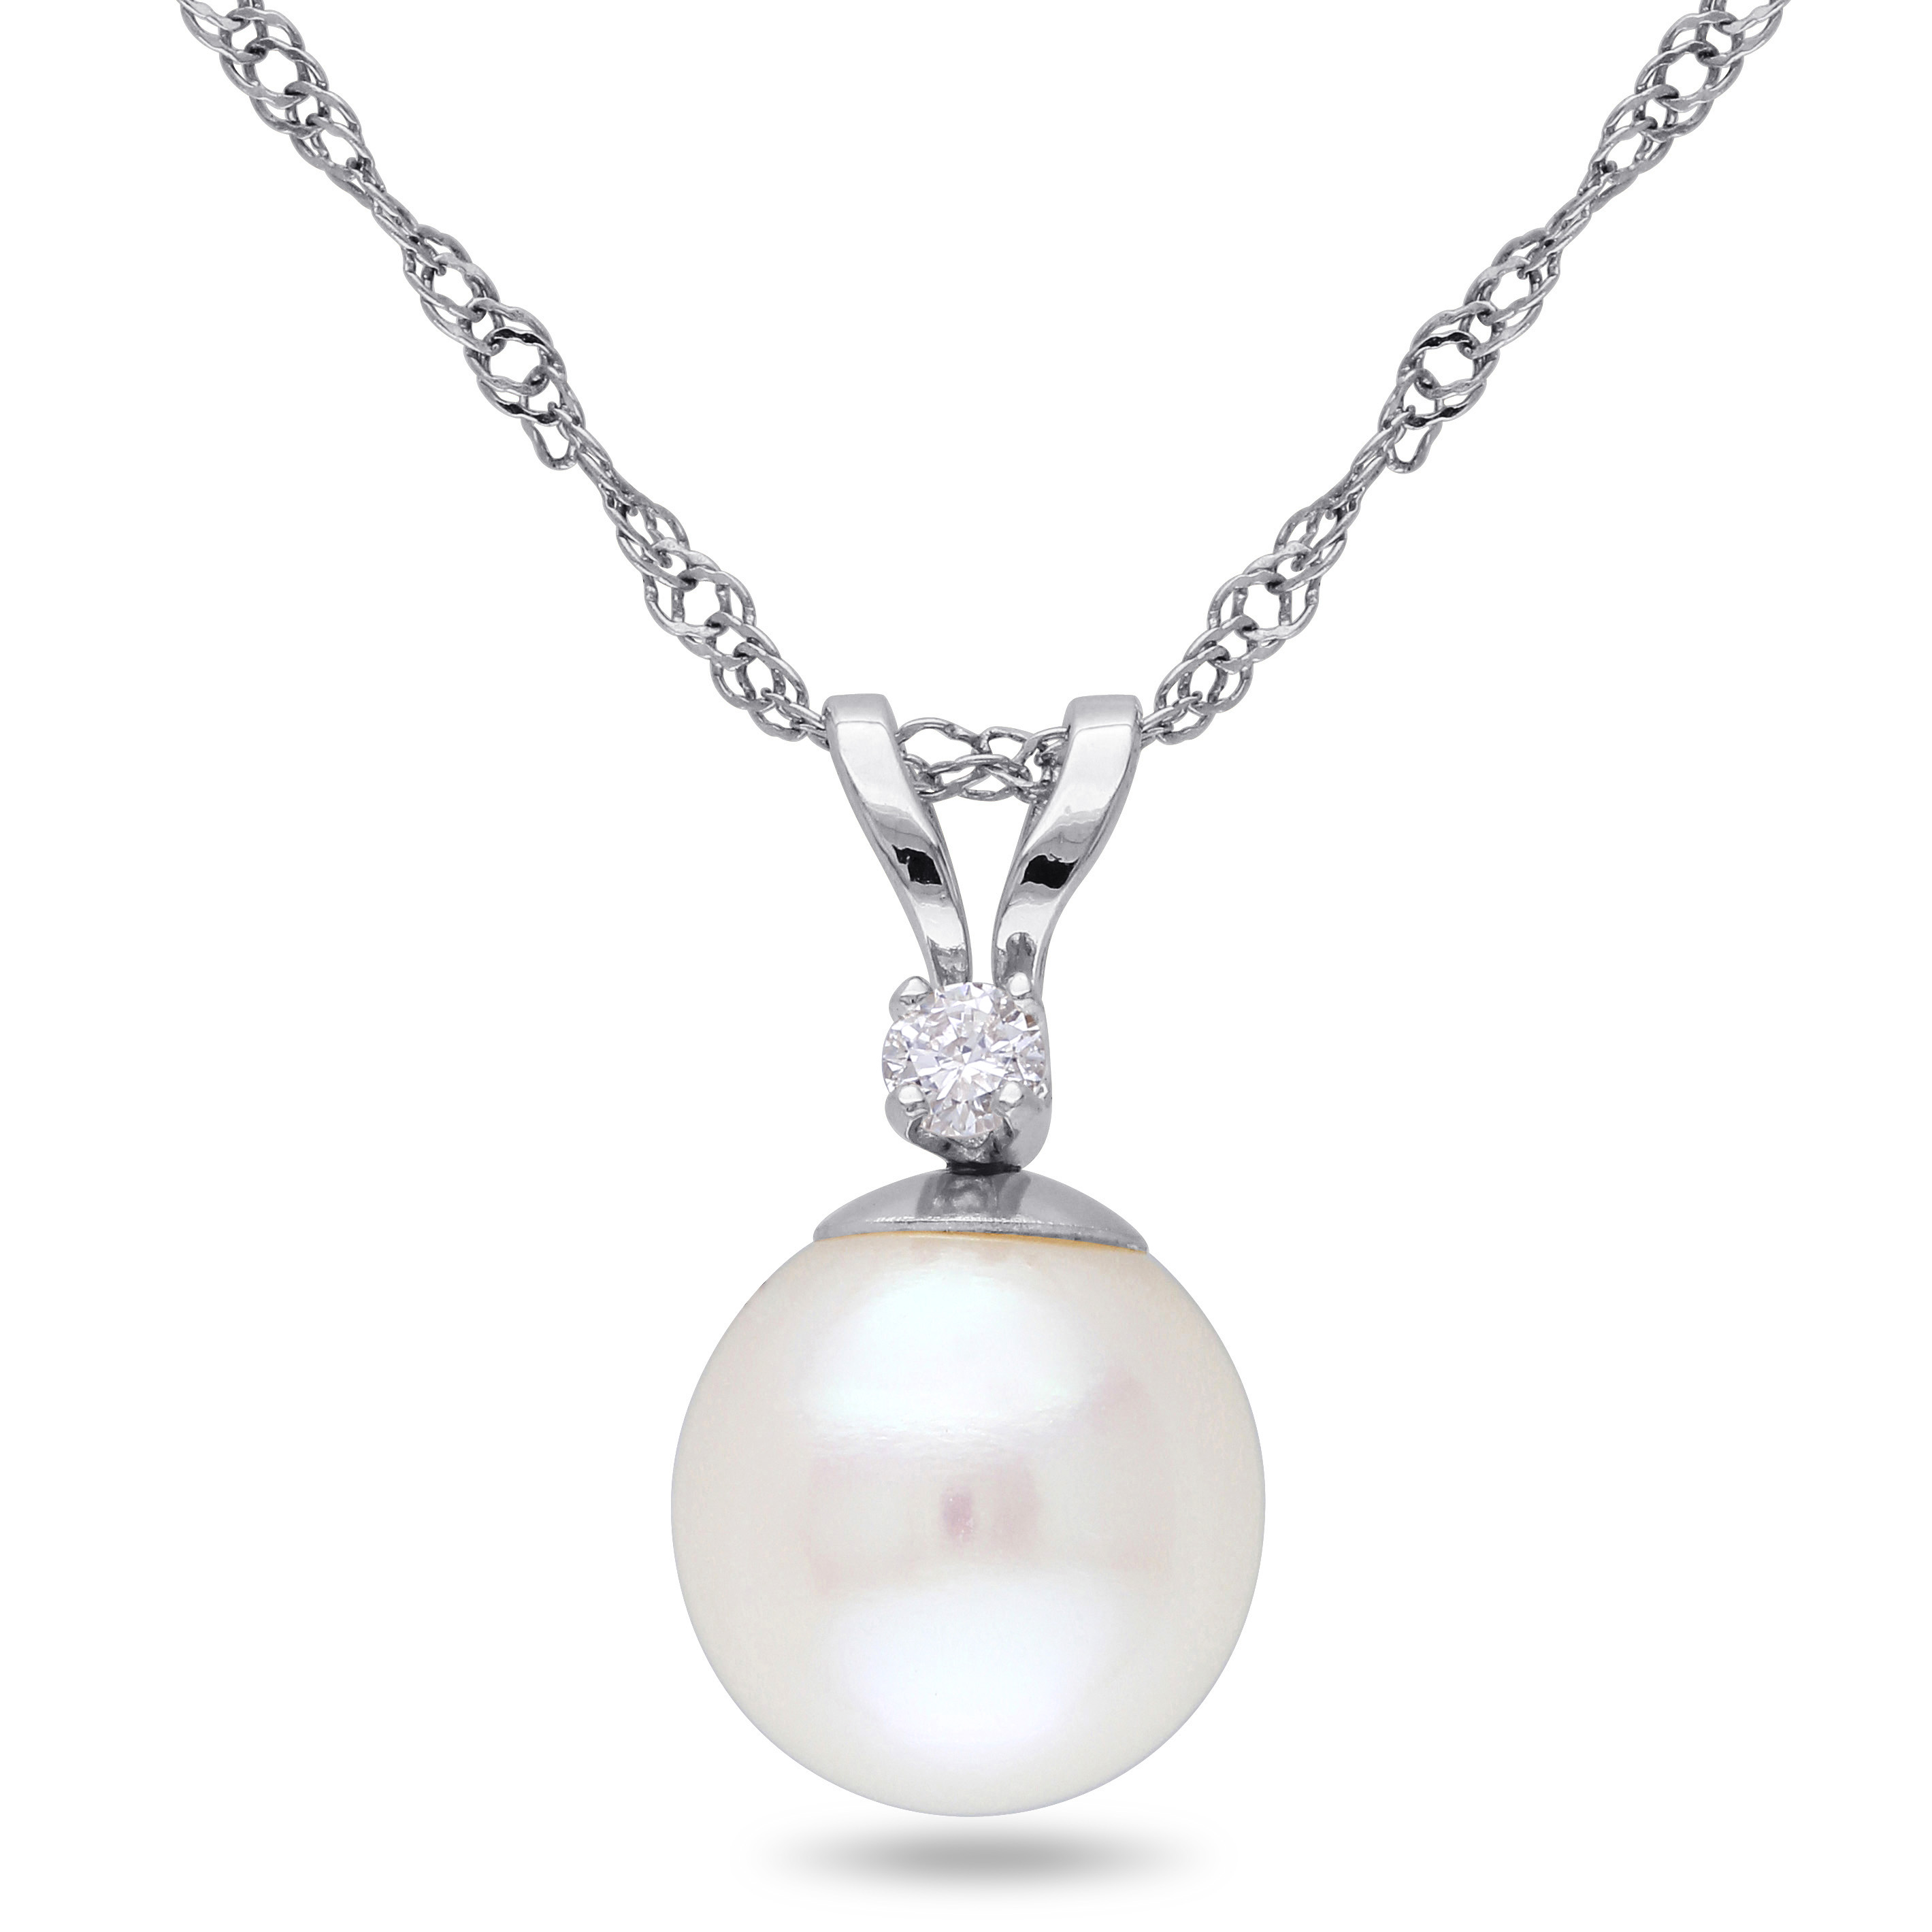 7-7.5 MM Cultured Freshwater Pearl and Diamond Accent Pendant with Chain in 14k White Gold - 17 in